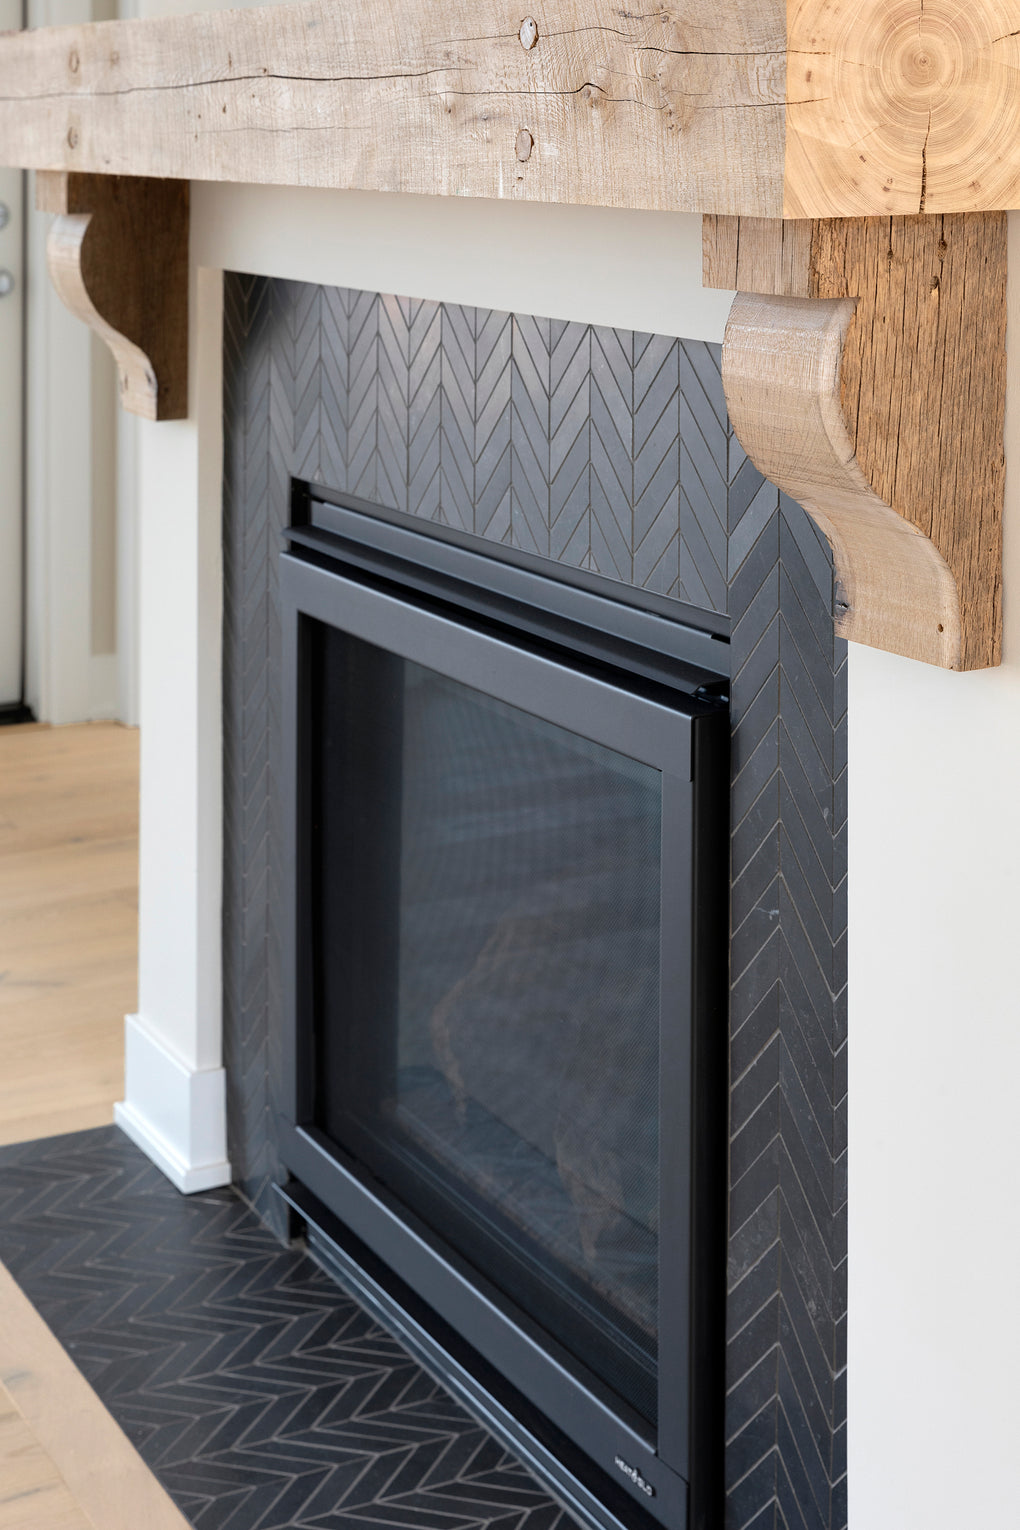 Tiling the Fireplace Surround 